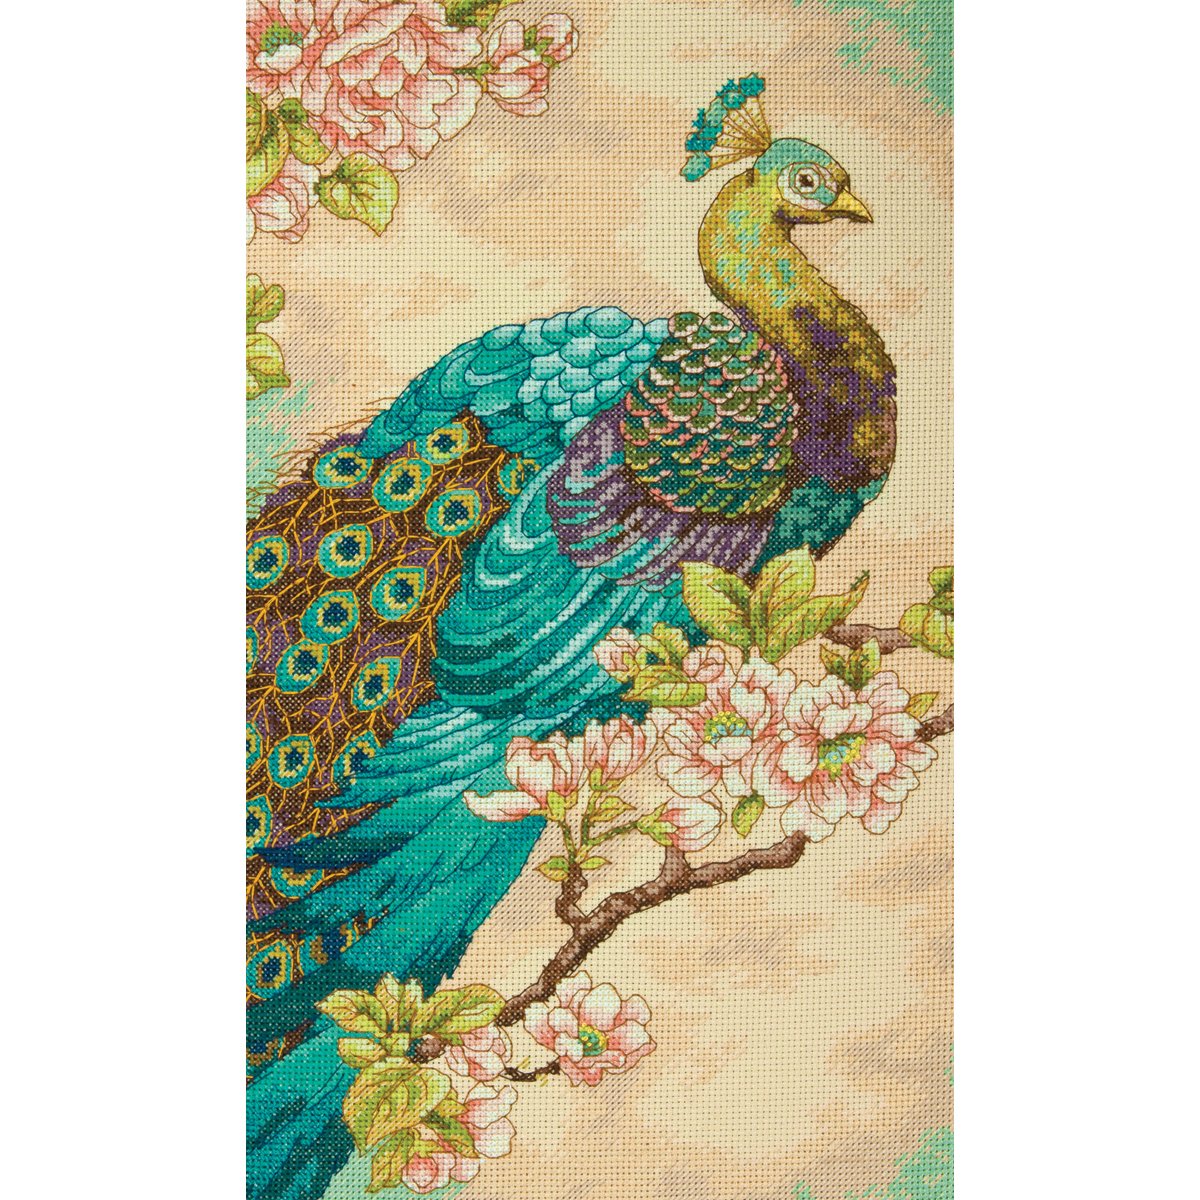 Simplicity Indian Peacock Counted Cross Stitch Kit by Dimensions, 1 Each - image 2 of 2